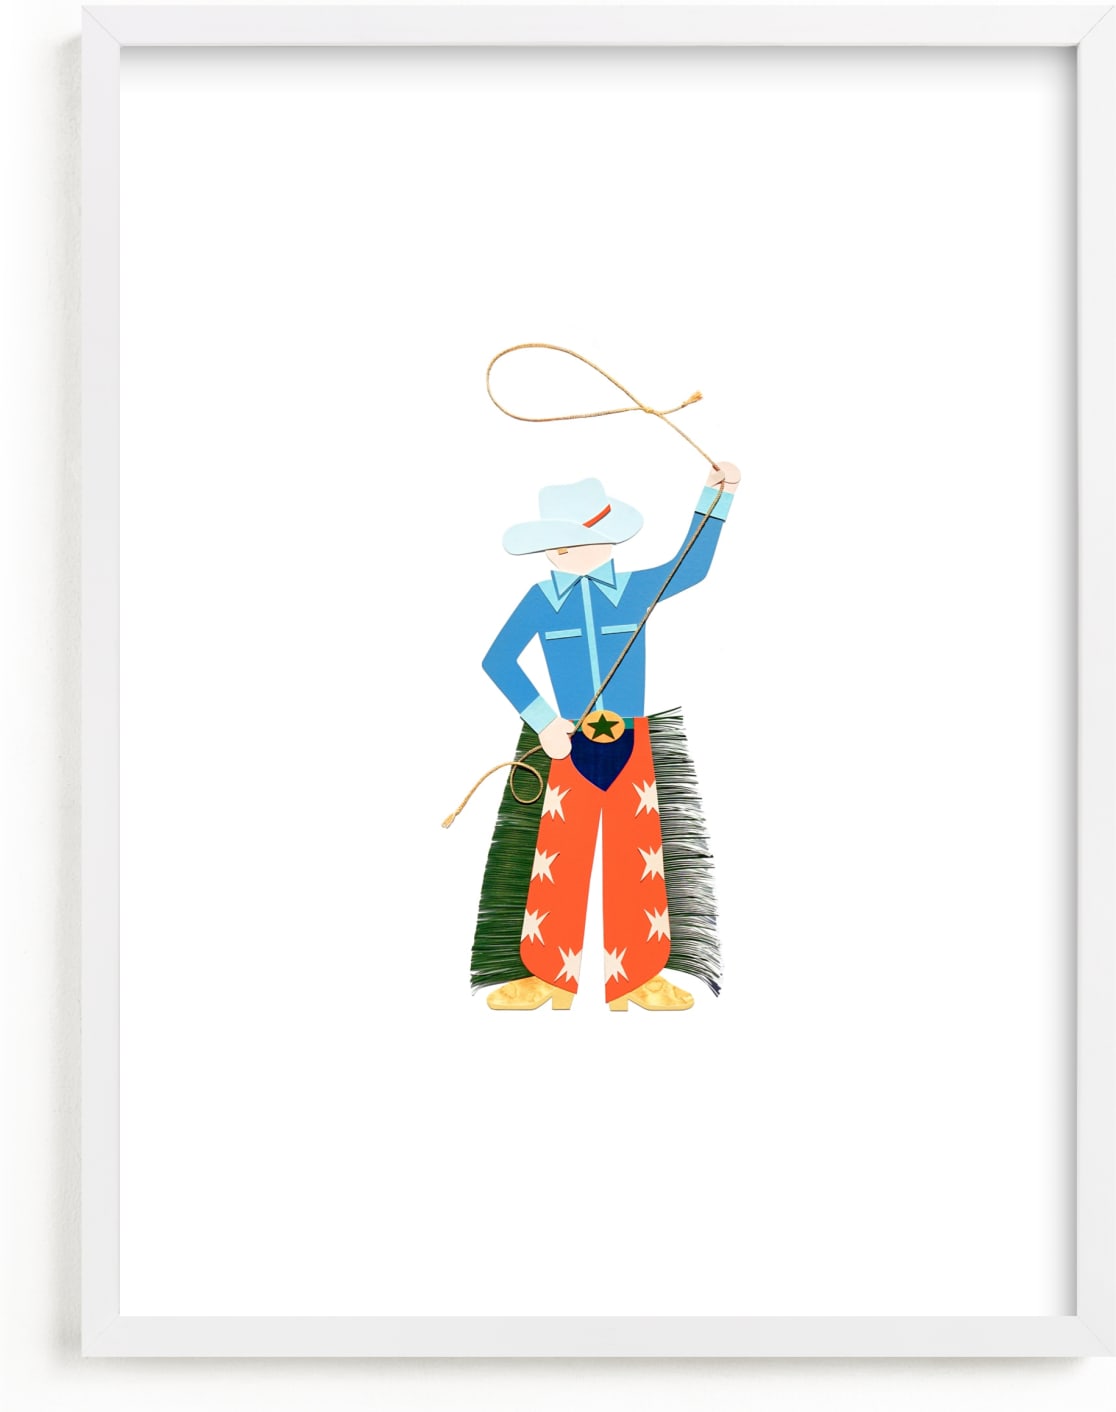 This is a blue kids wall art by Kelsey Livingston called Cowboy Carl.